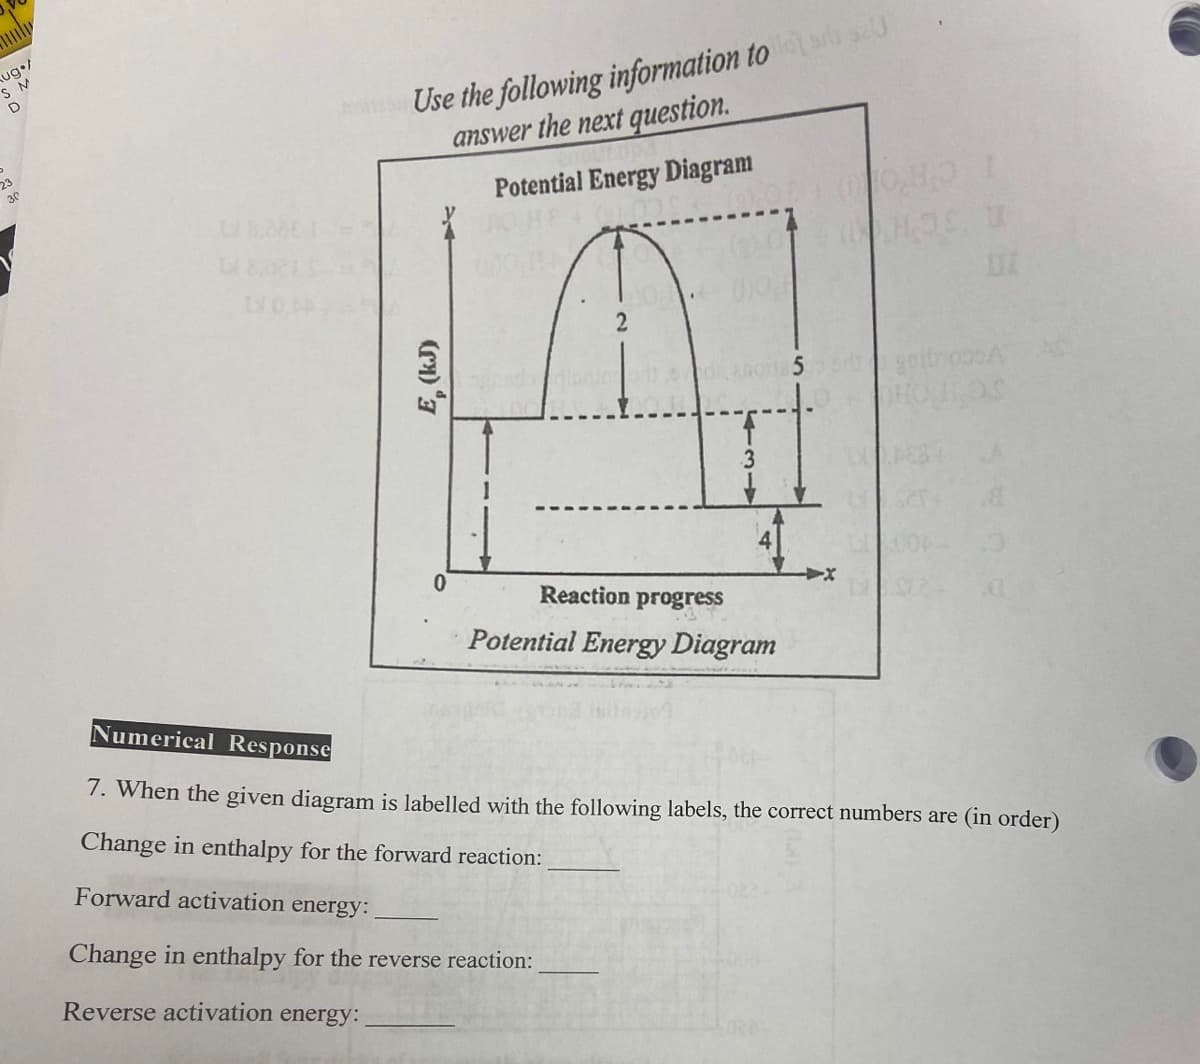 Aug /
SM
D
23
30
on Use the following information to 0
answer the next question.
Potential Energy Diagram
E, (kJ)
0
2
Reaction progress
Potential Energy Diagram
Change in enthalpy for the reverse reaction:
Reverse activation energy:
U
UI
Numerical Response
7. When the given diagram is labelled with the following labels, the correct numbers are (in order)
Change in enthalpy for the forward reaction:
Forward activation energy: